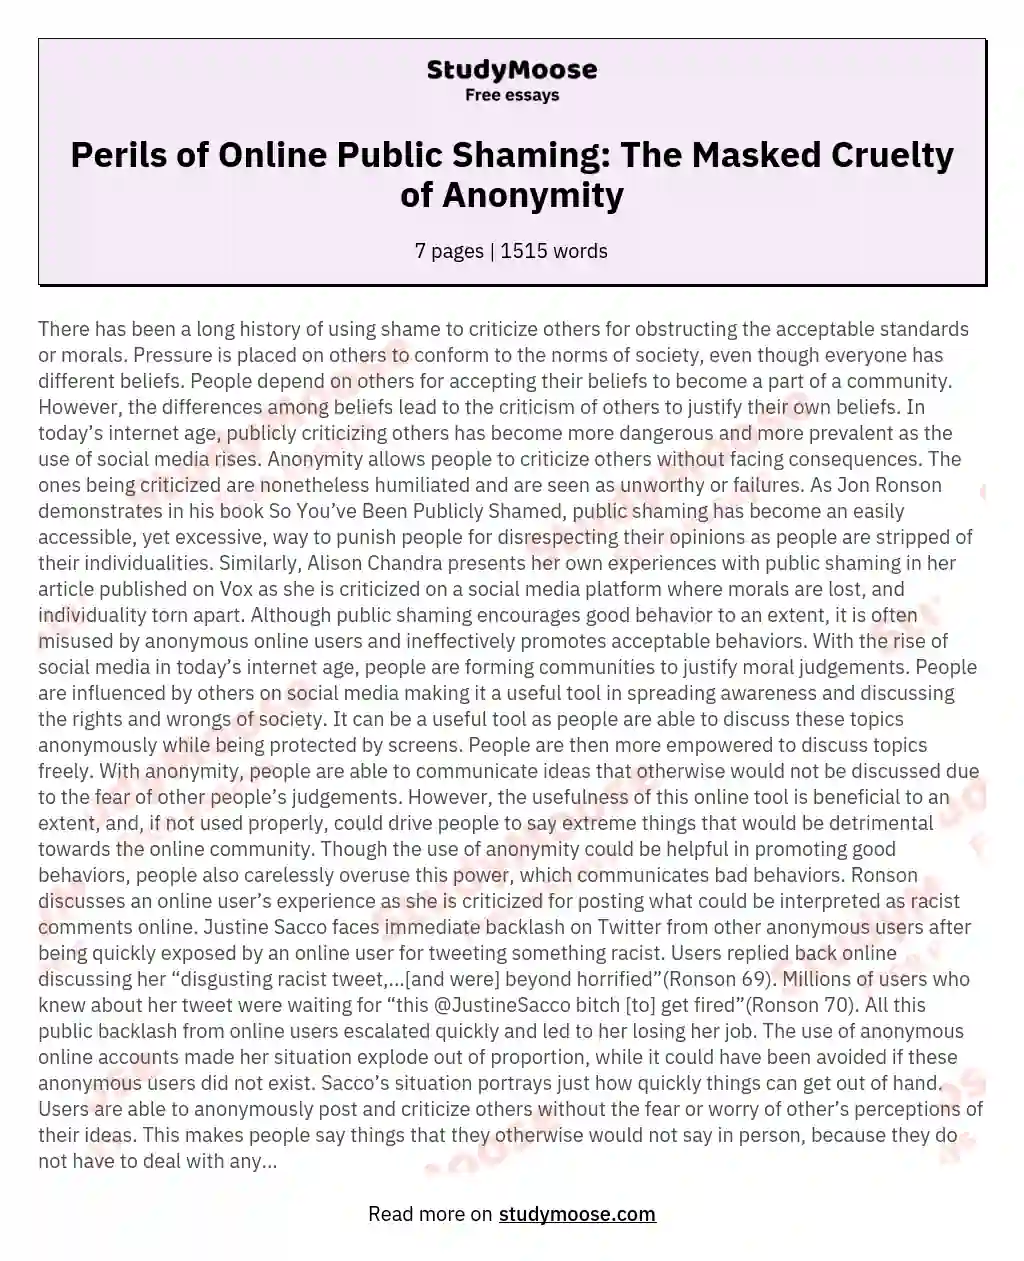 Perils of Online Public Shaming: The Masked Cruelty of Anonymity essay